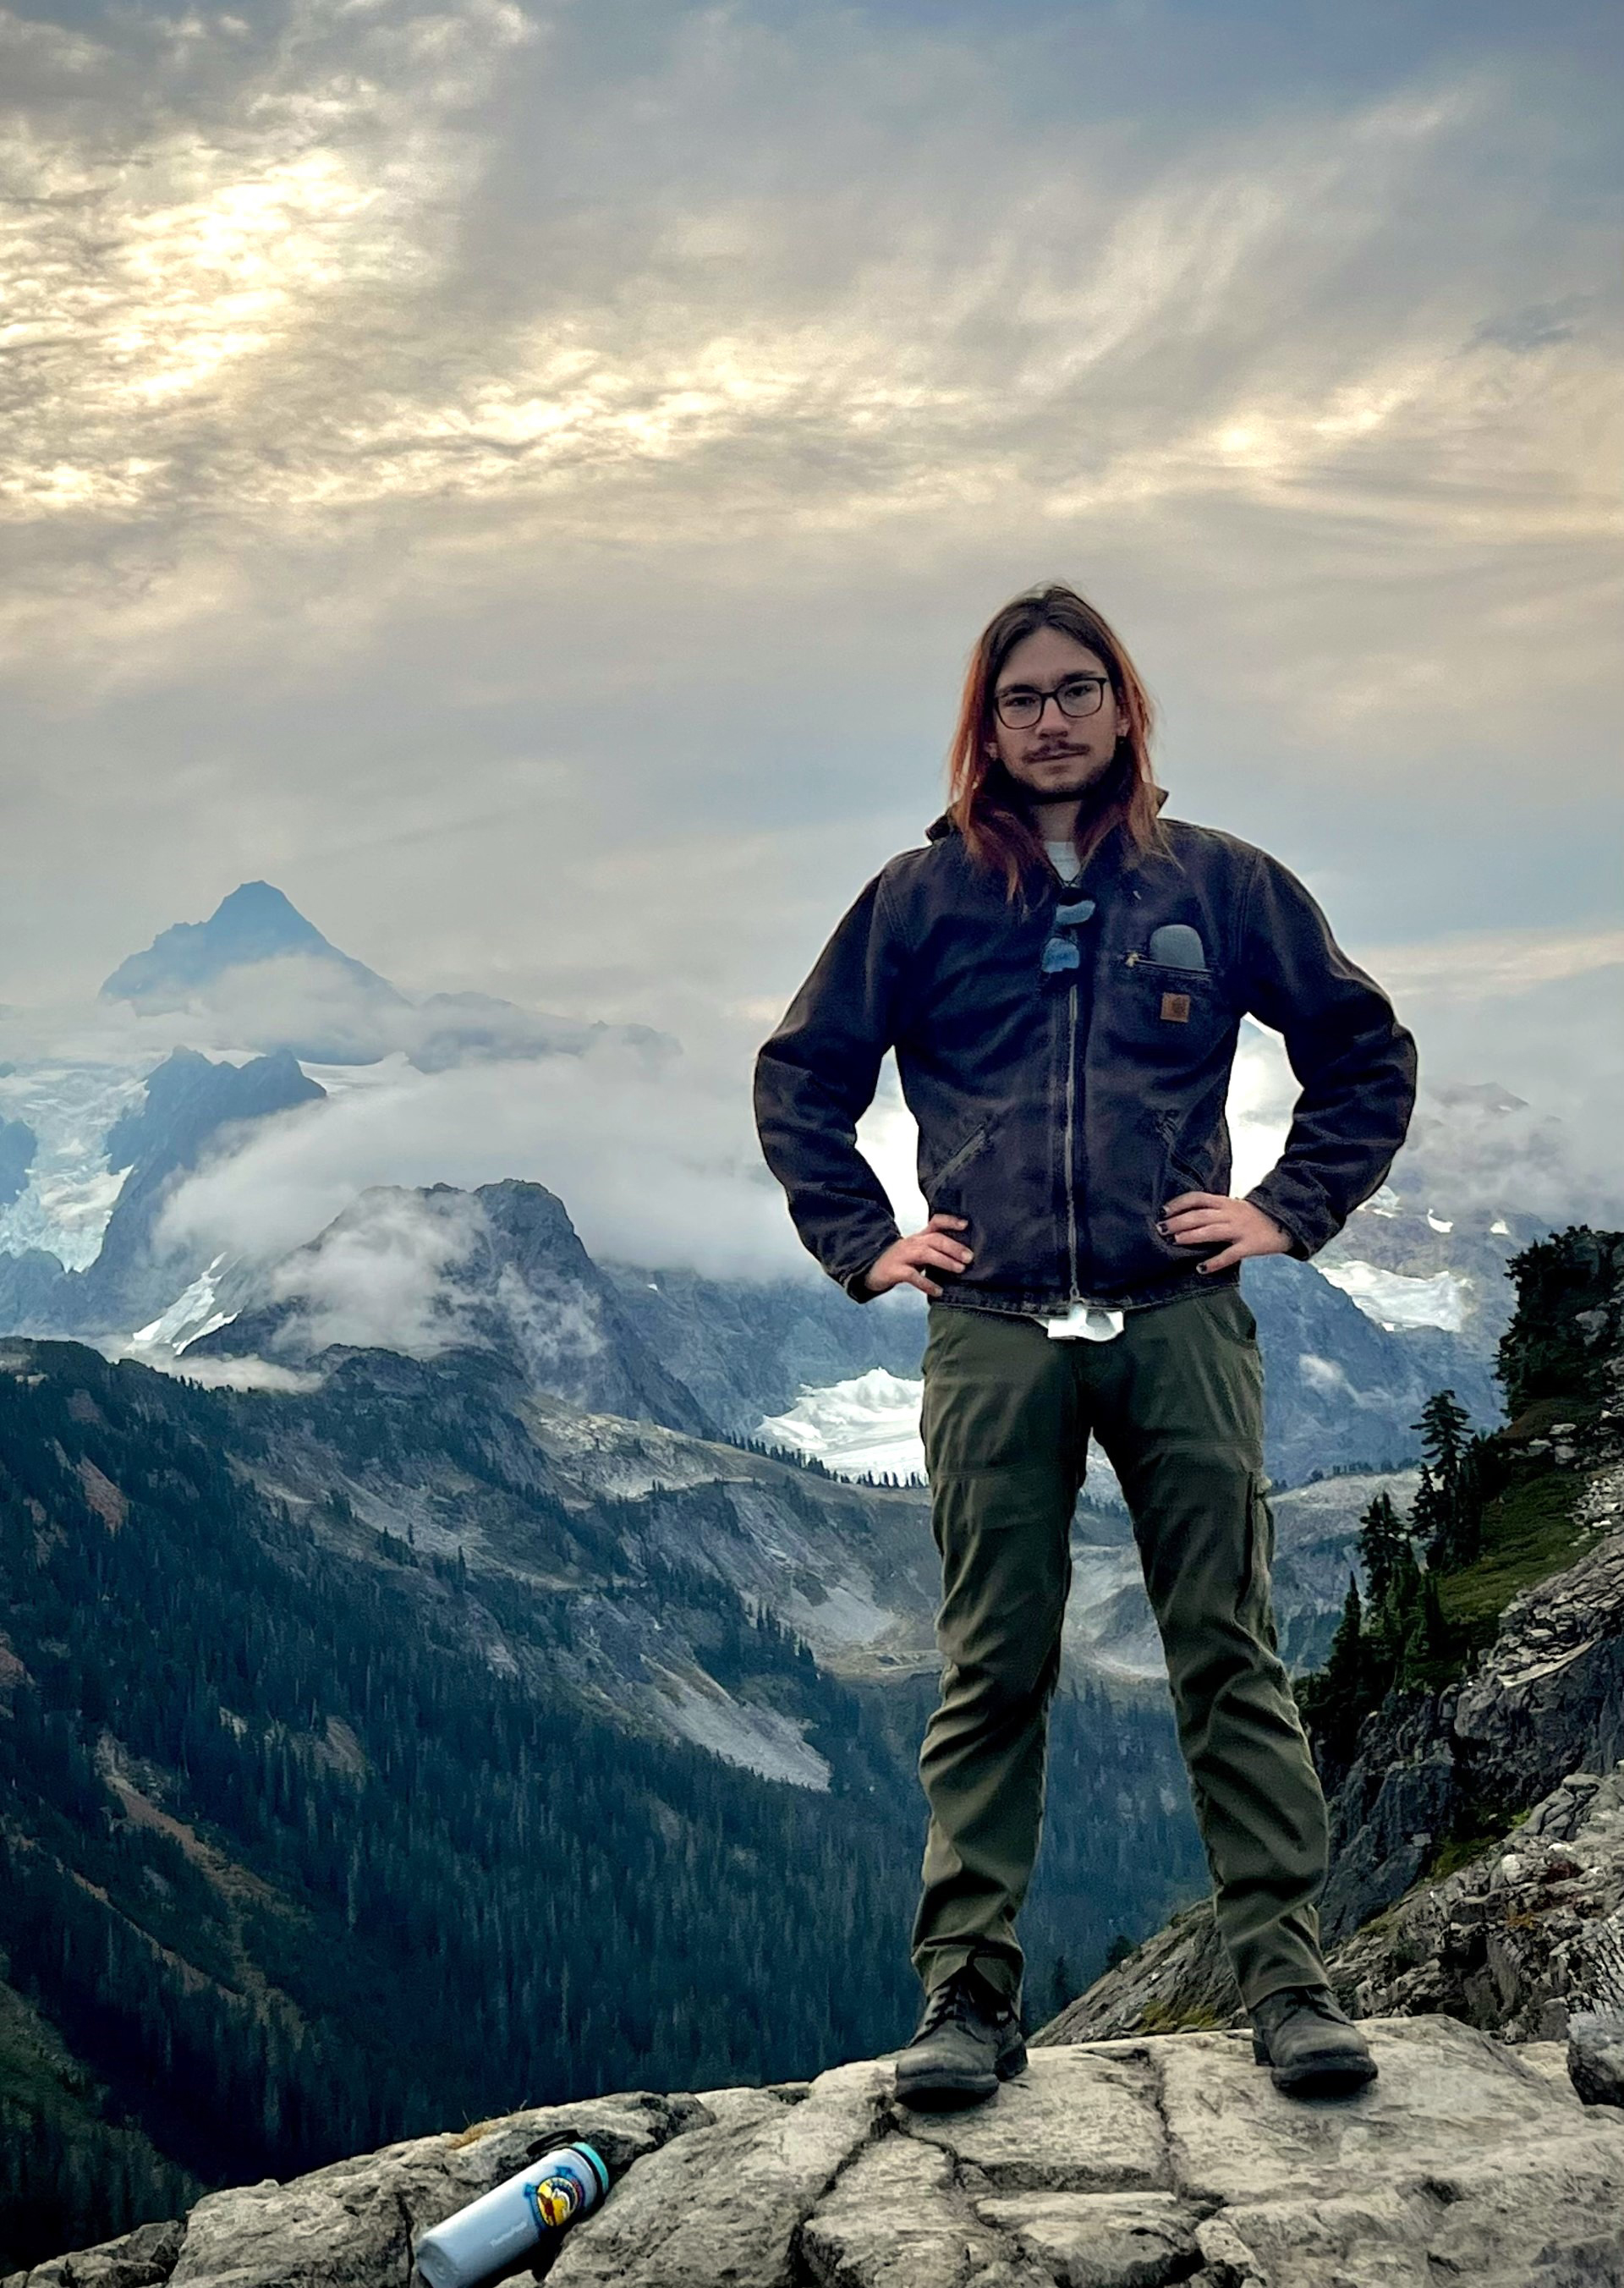 Liam KenWood stands on a rocky mountain with clouds and mountains in the background.